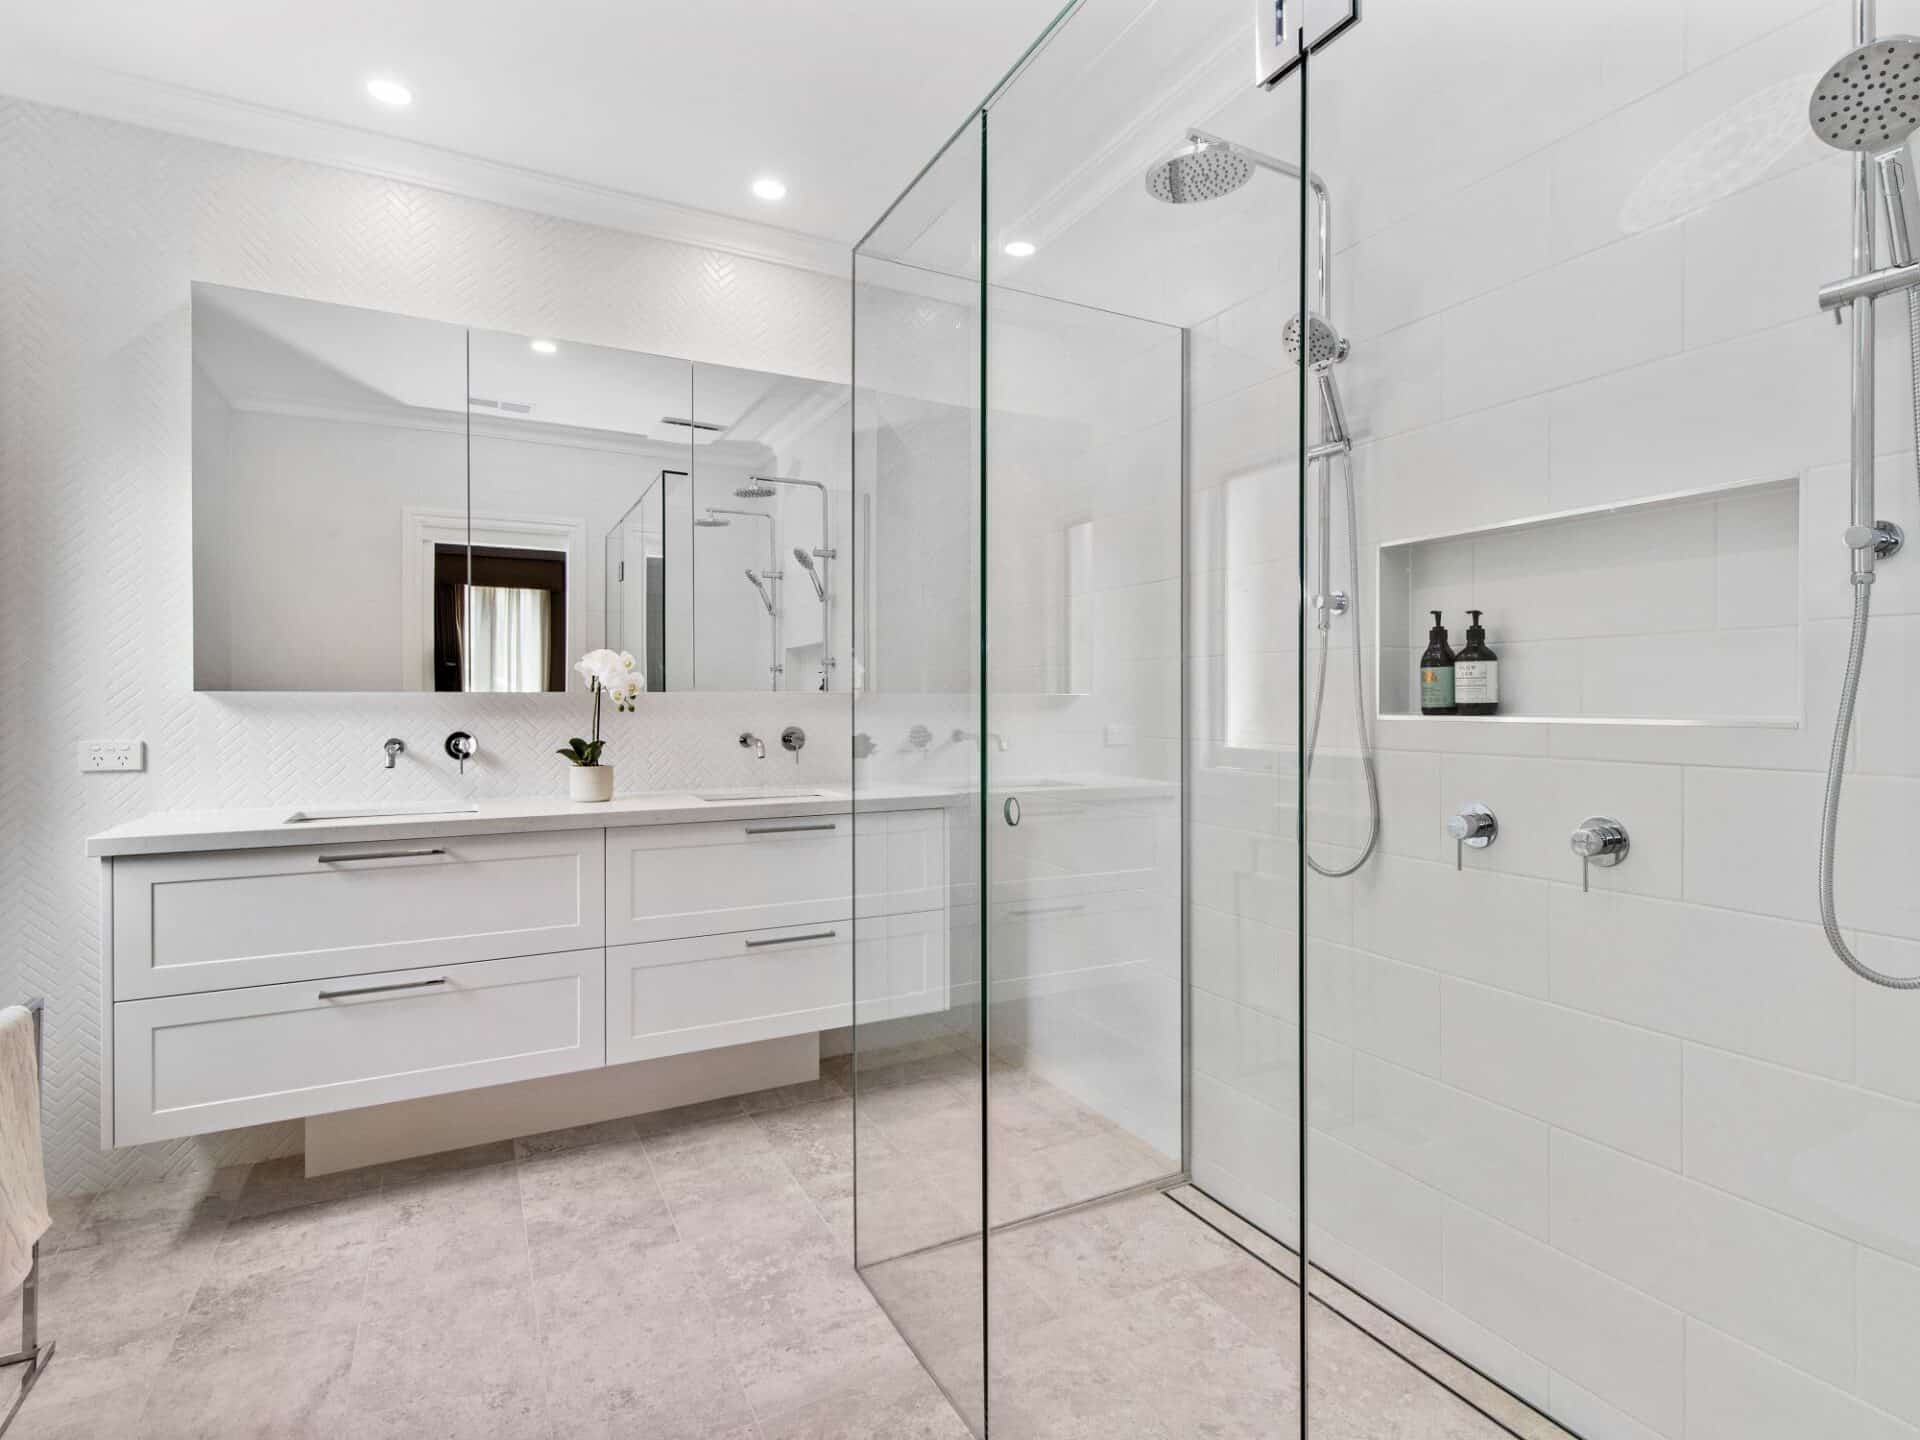 Shower & Basin Renovations Services by Bayview Renovations